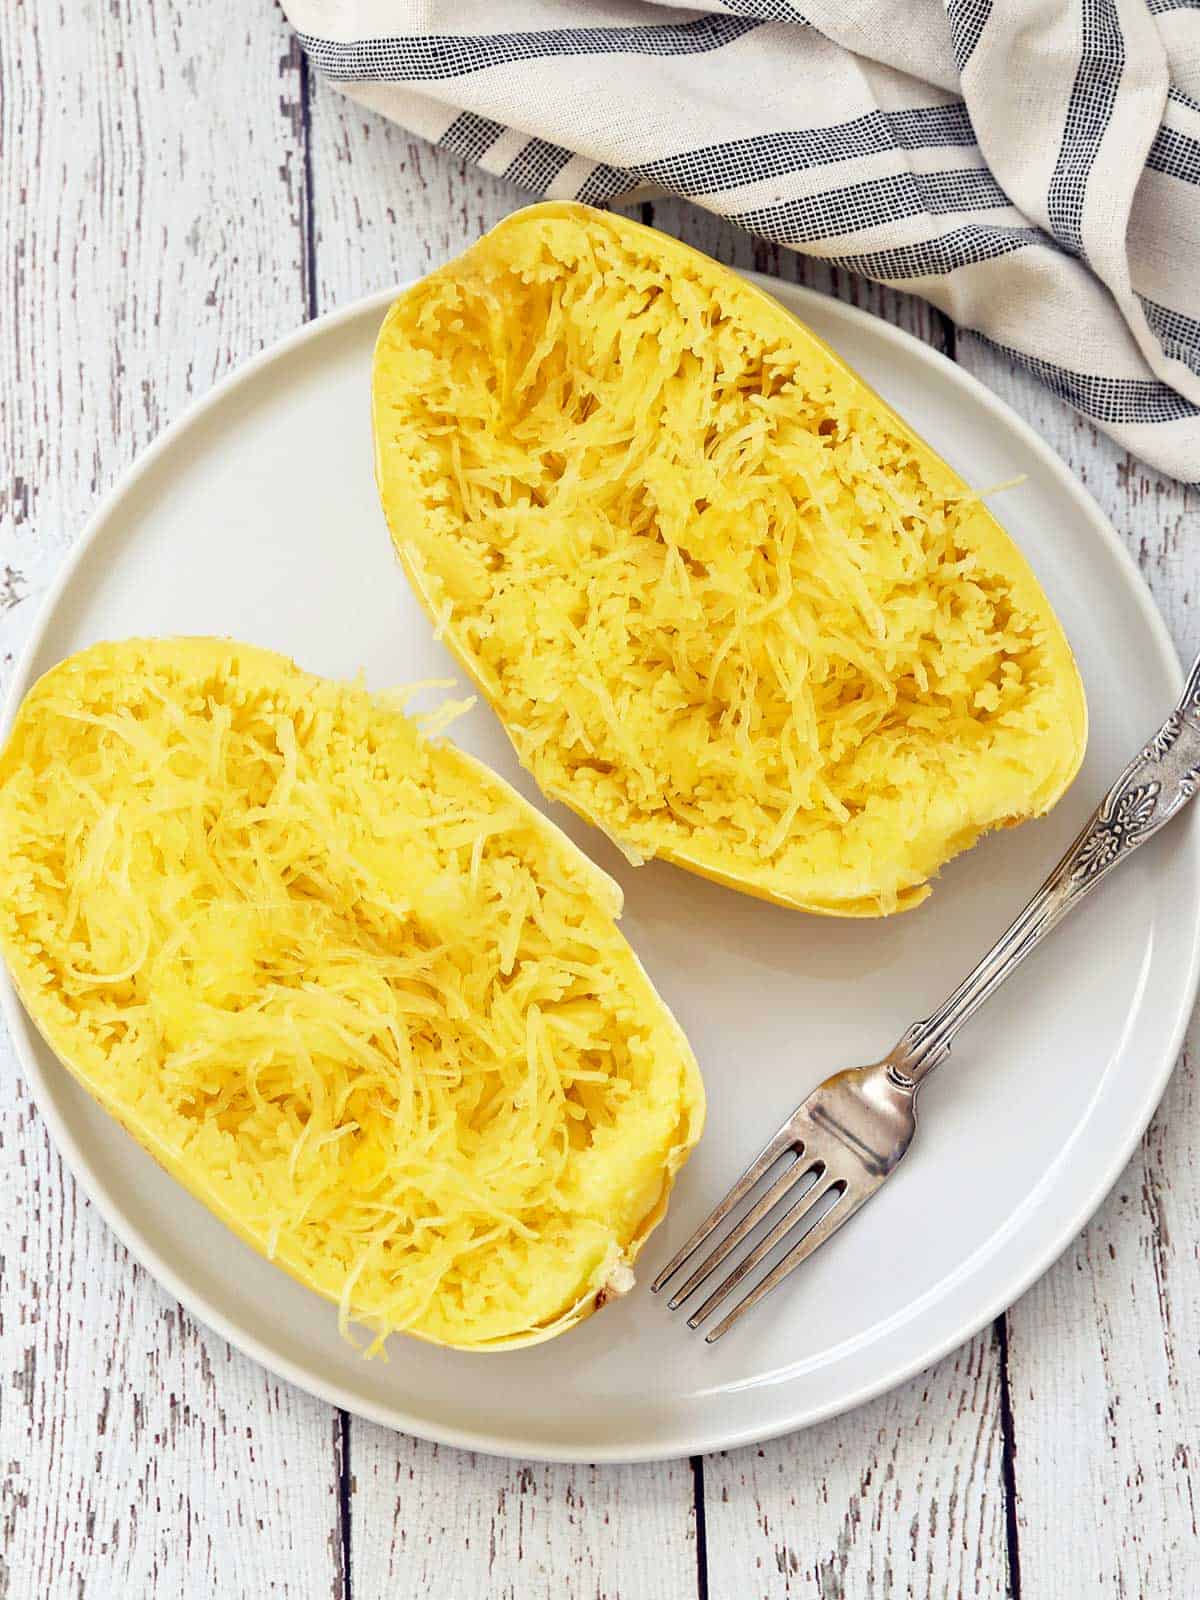 Microwave spaghetti squash is served on a plate with a fork.